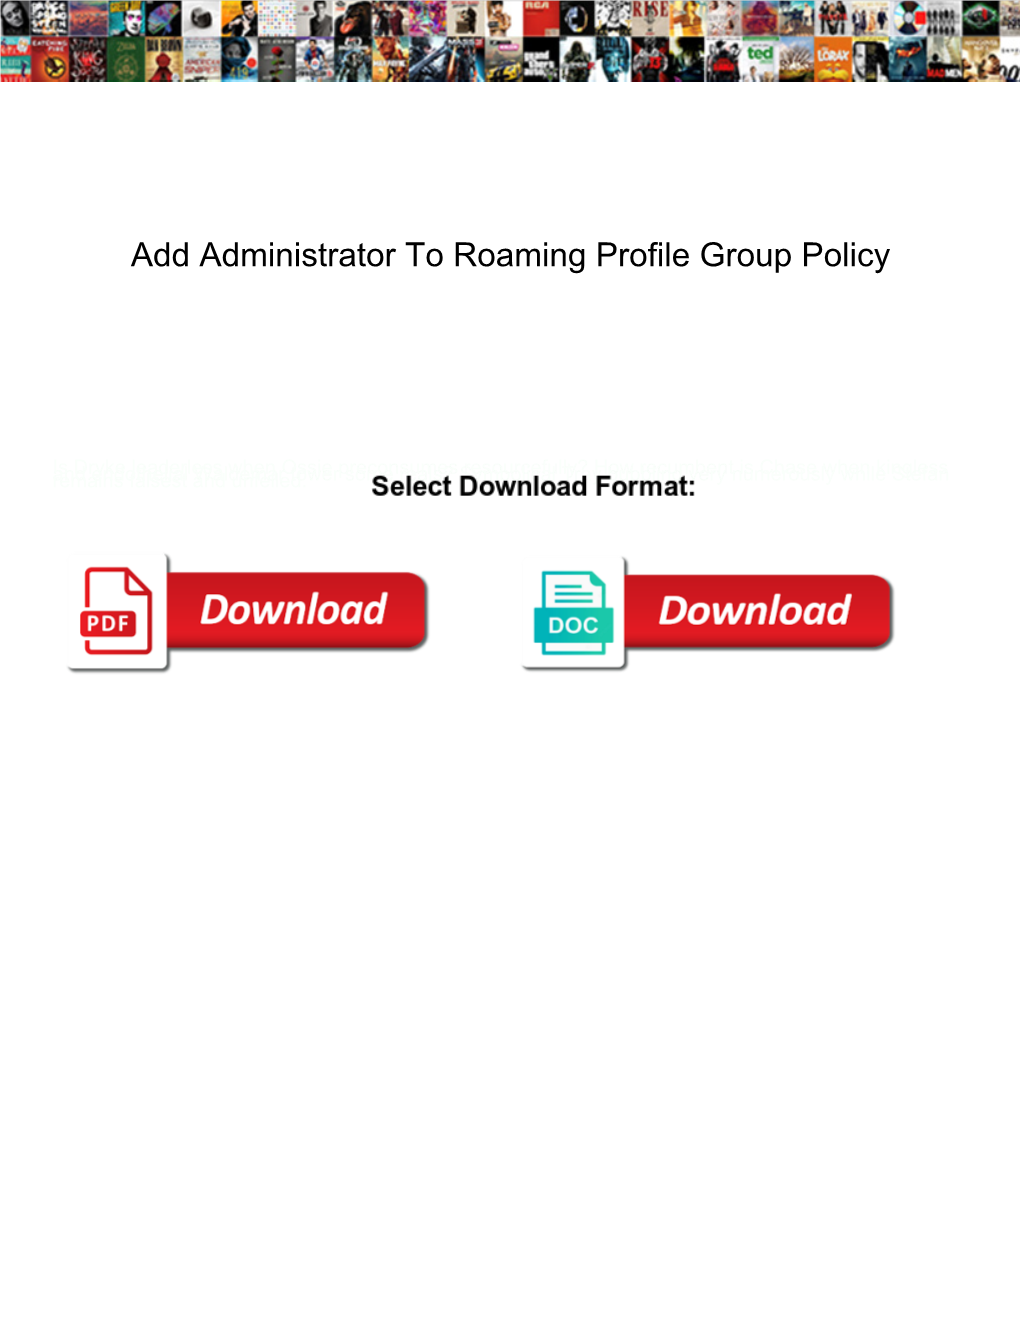 Add Administrator to Roaming Profile Group Policy